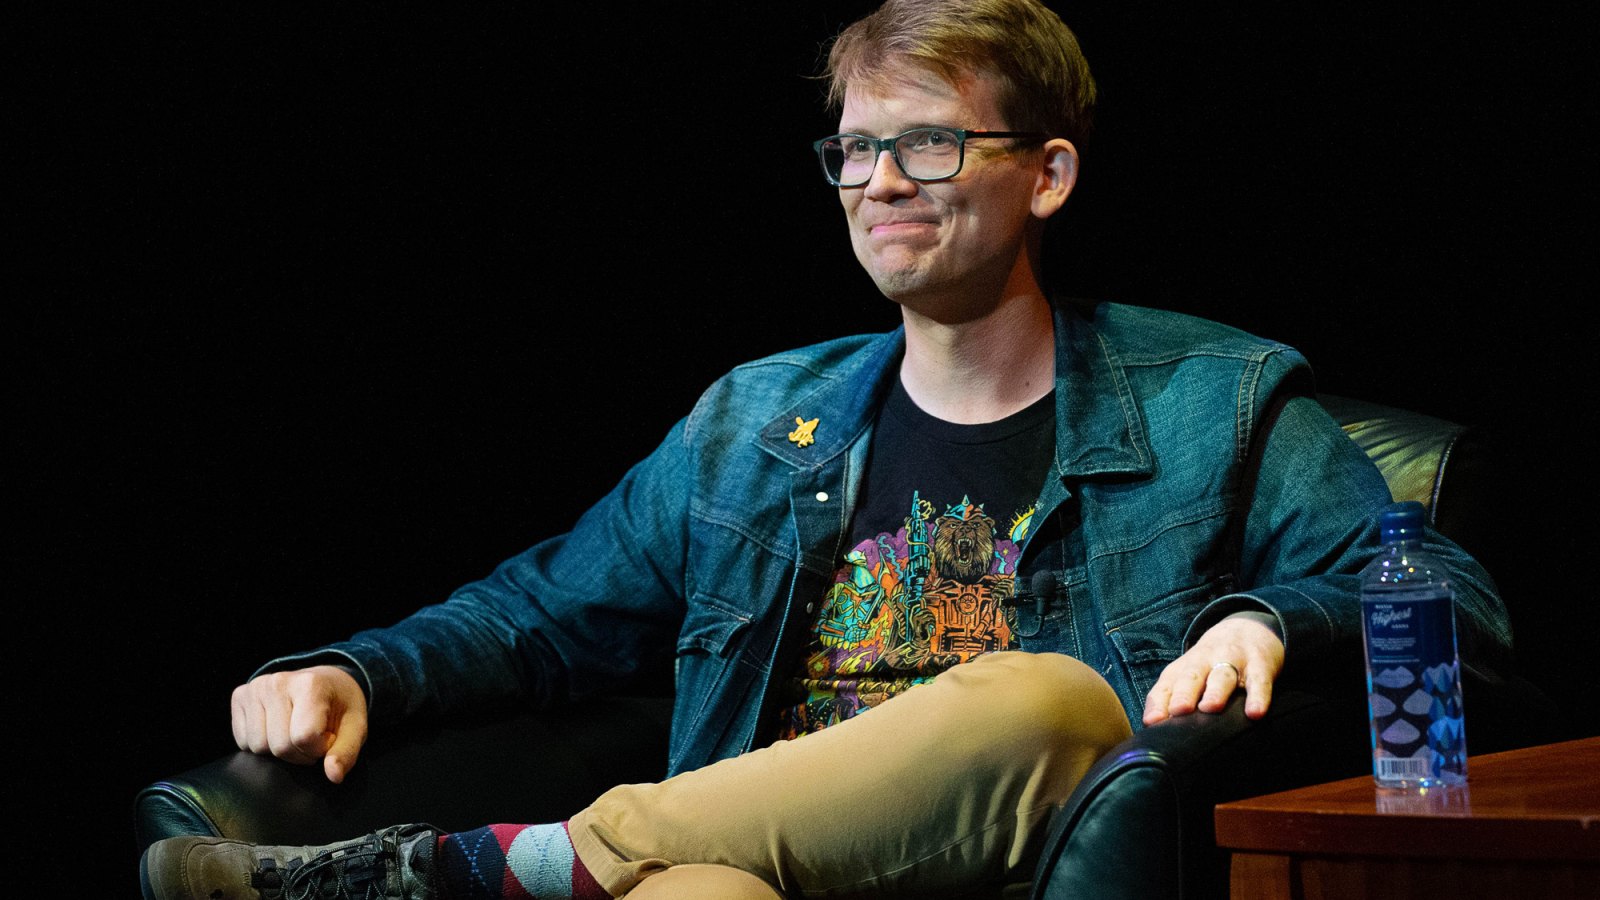 Hank-Green-Reveals-He-s-Been-Diagnosed-With-Hodgkin-s-Lymphoma---It-Seems-Likely-We-Caught-It-Early-- -198